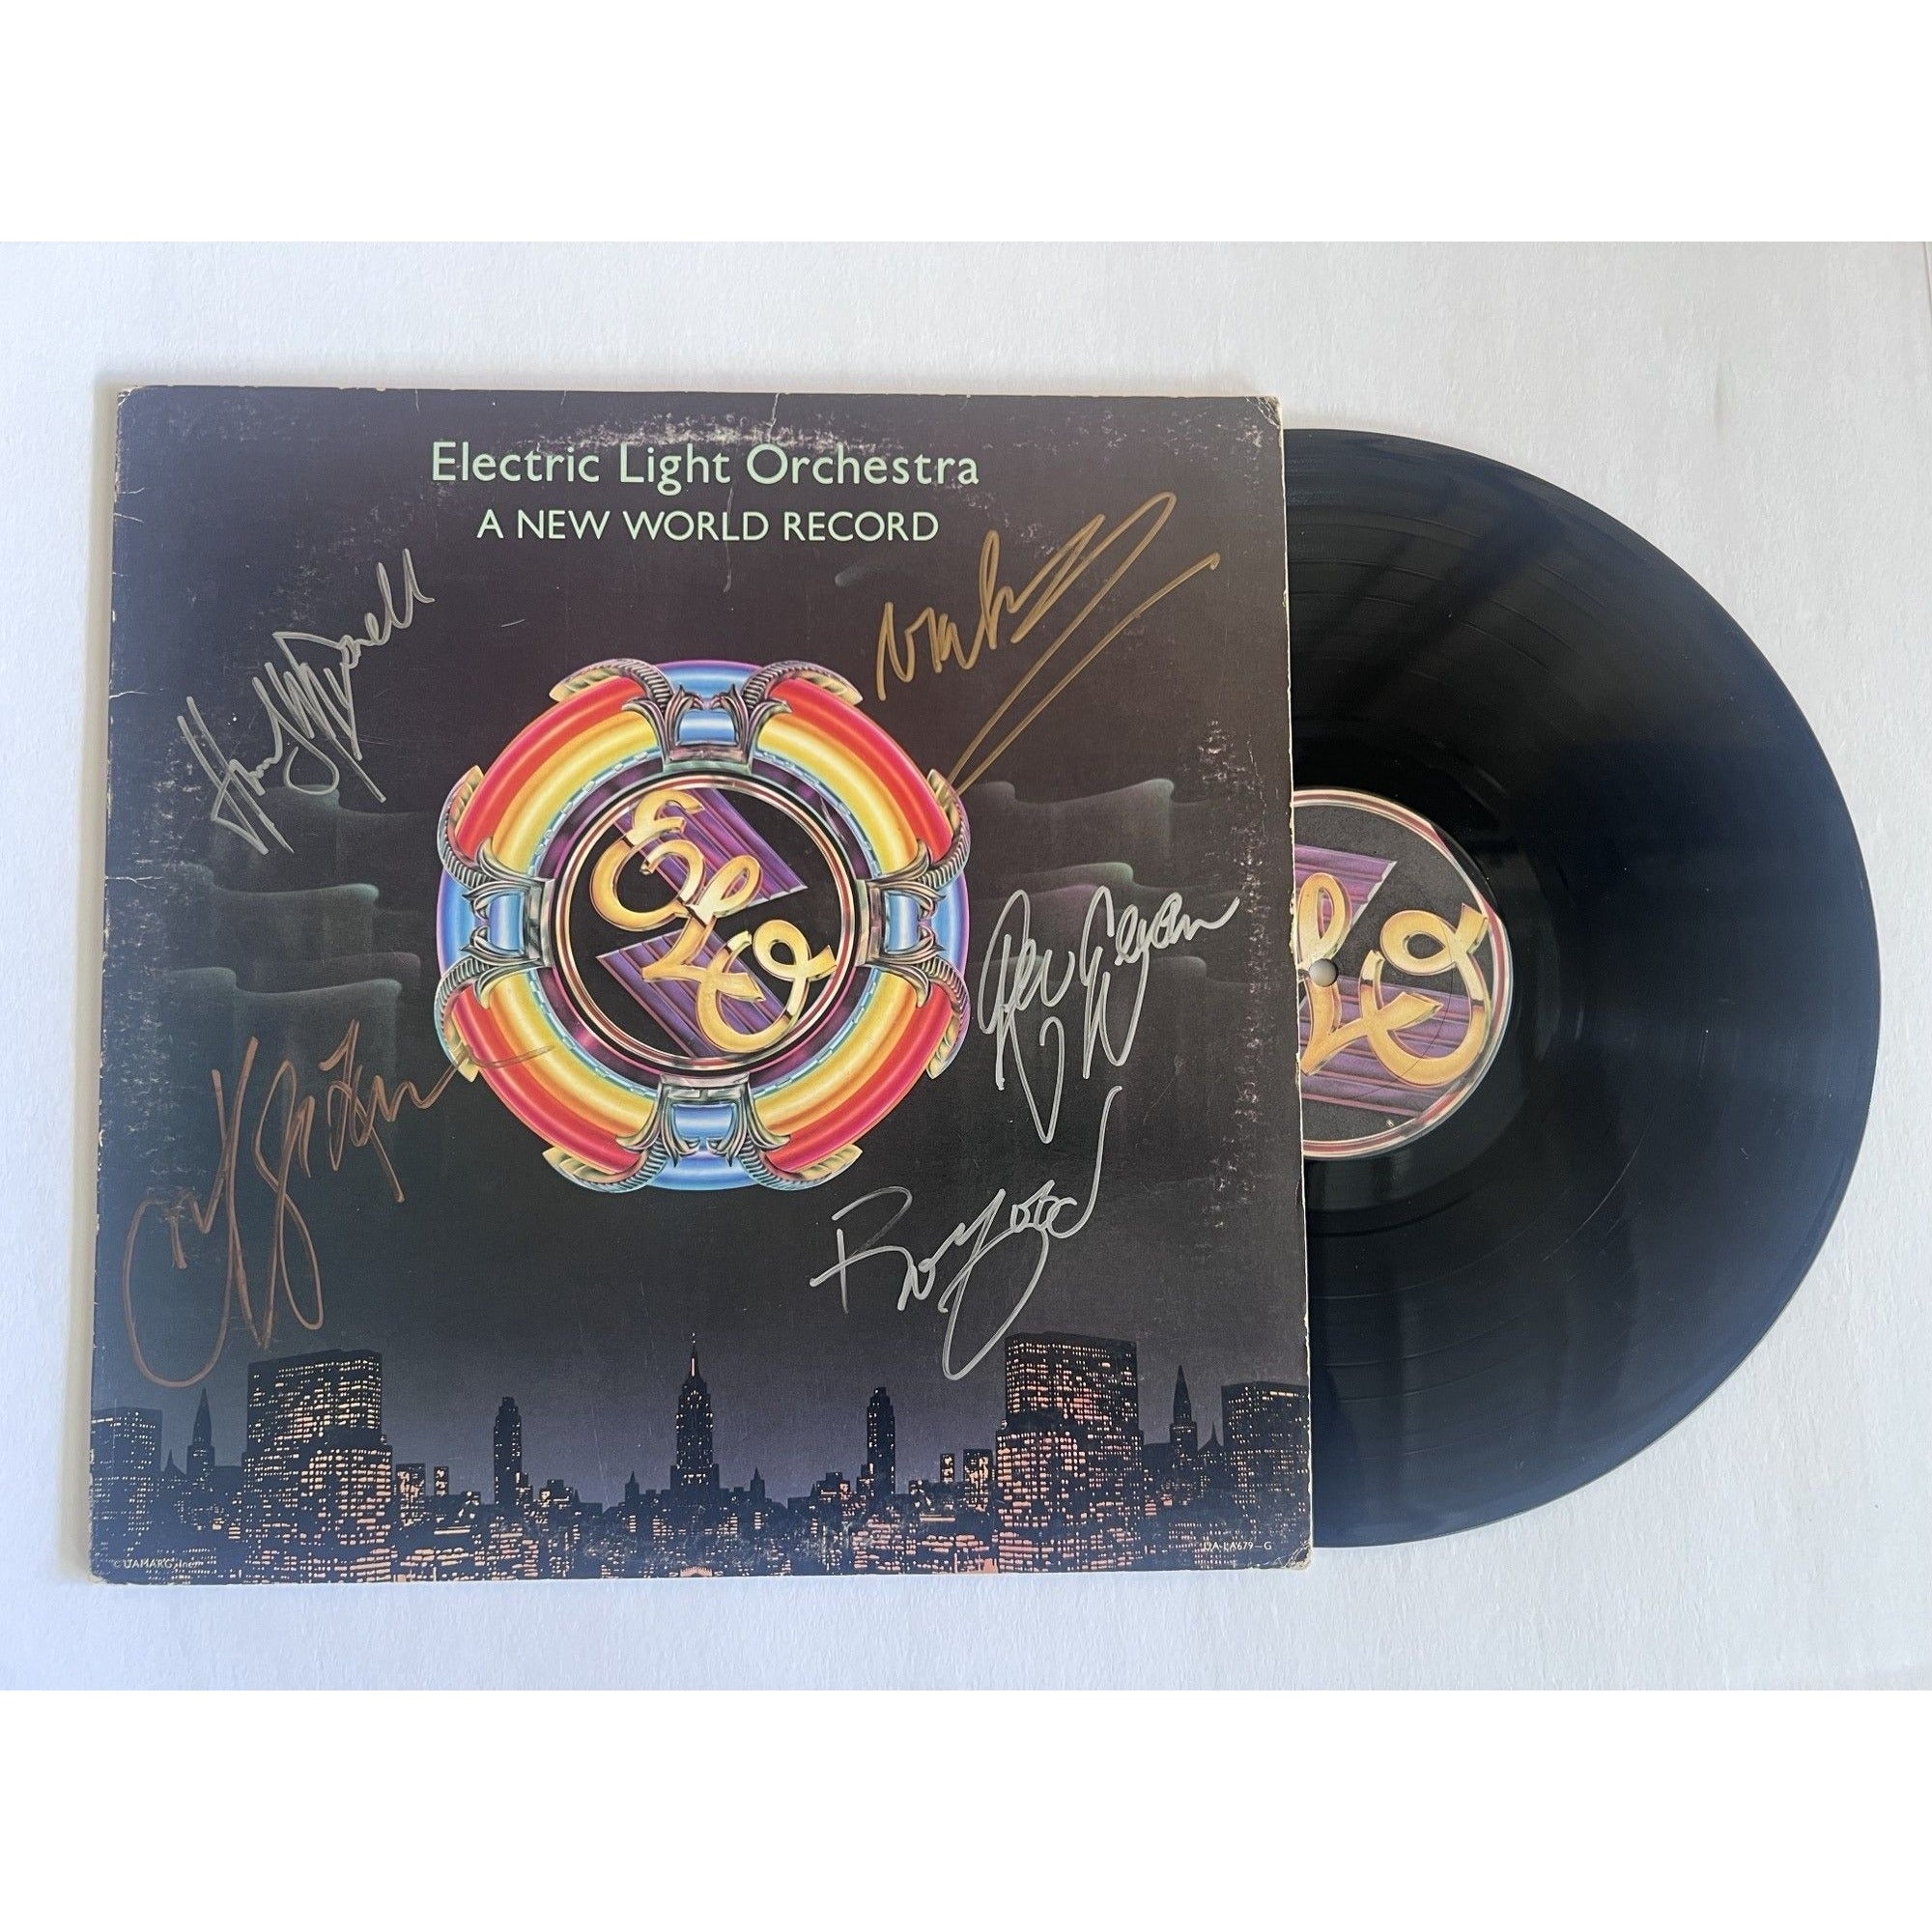 ELO Jeff Lynne Electric Light Orchestra original LP signed with proof